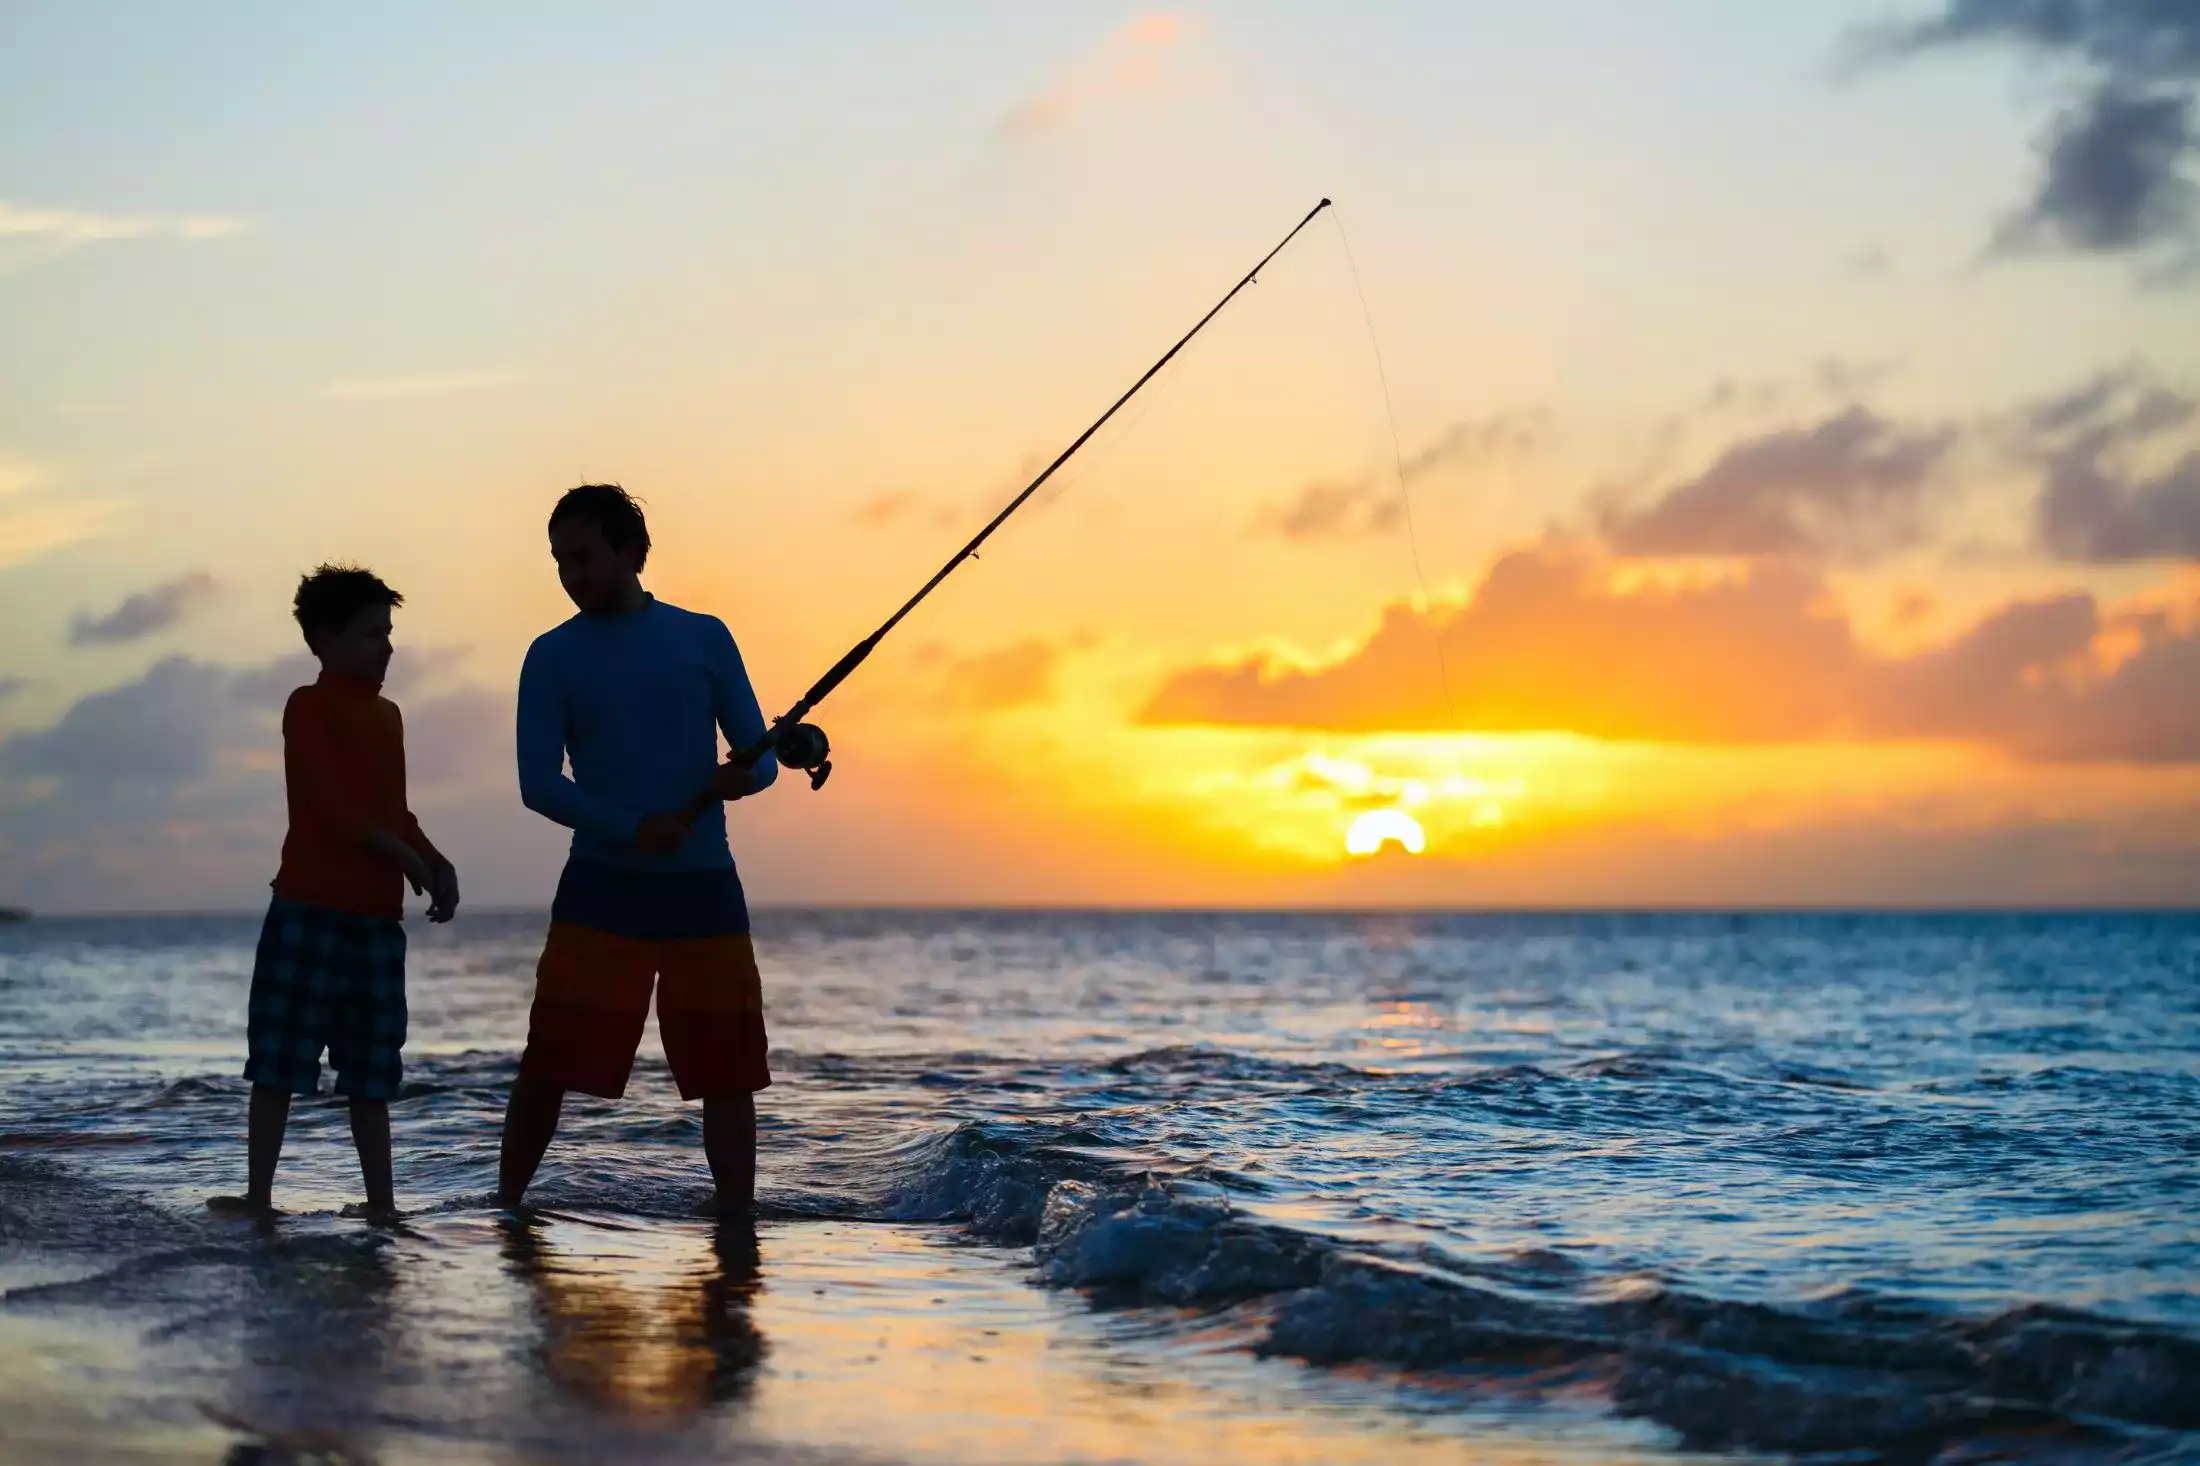 Family fly-fishing at sunset on a Seychelles Island.